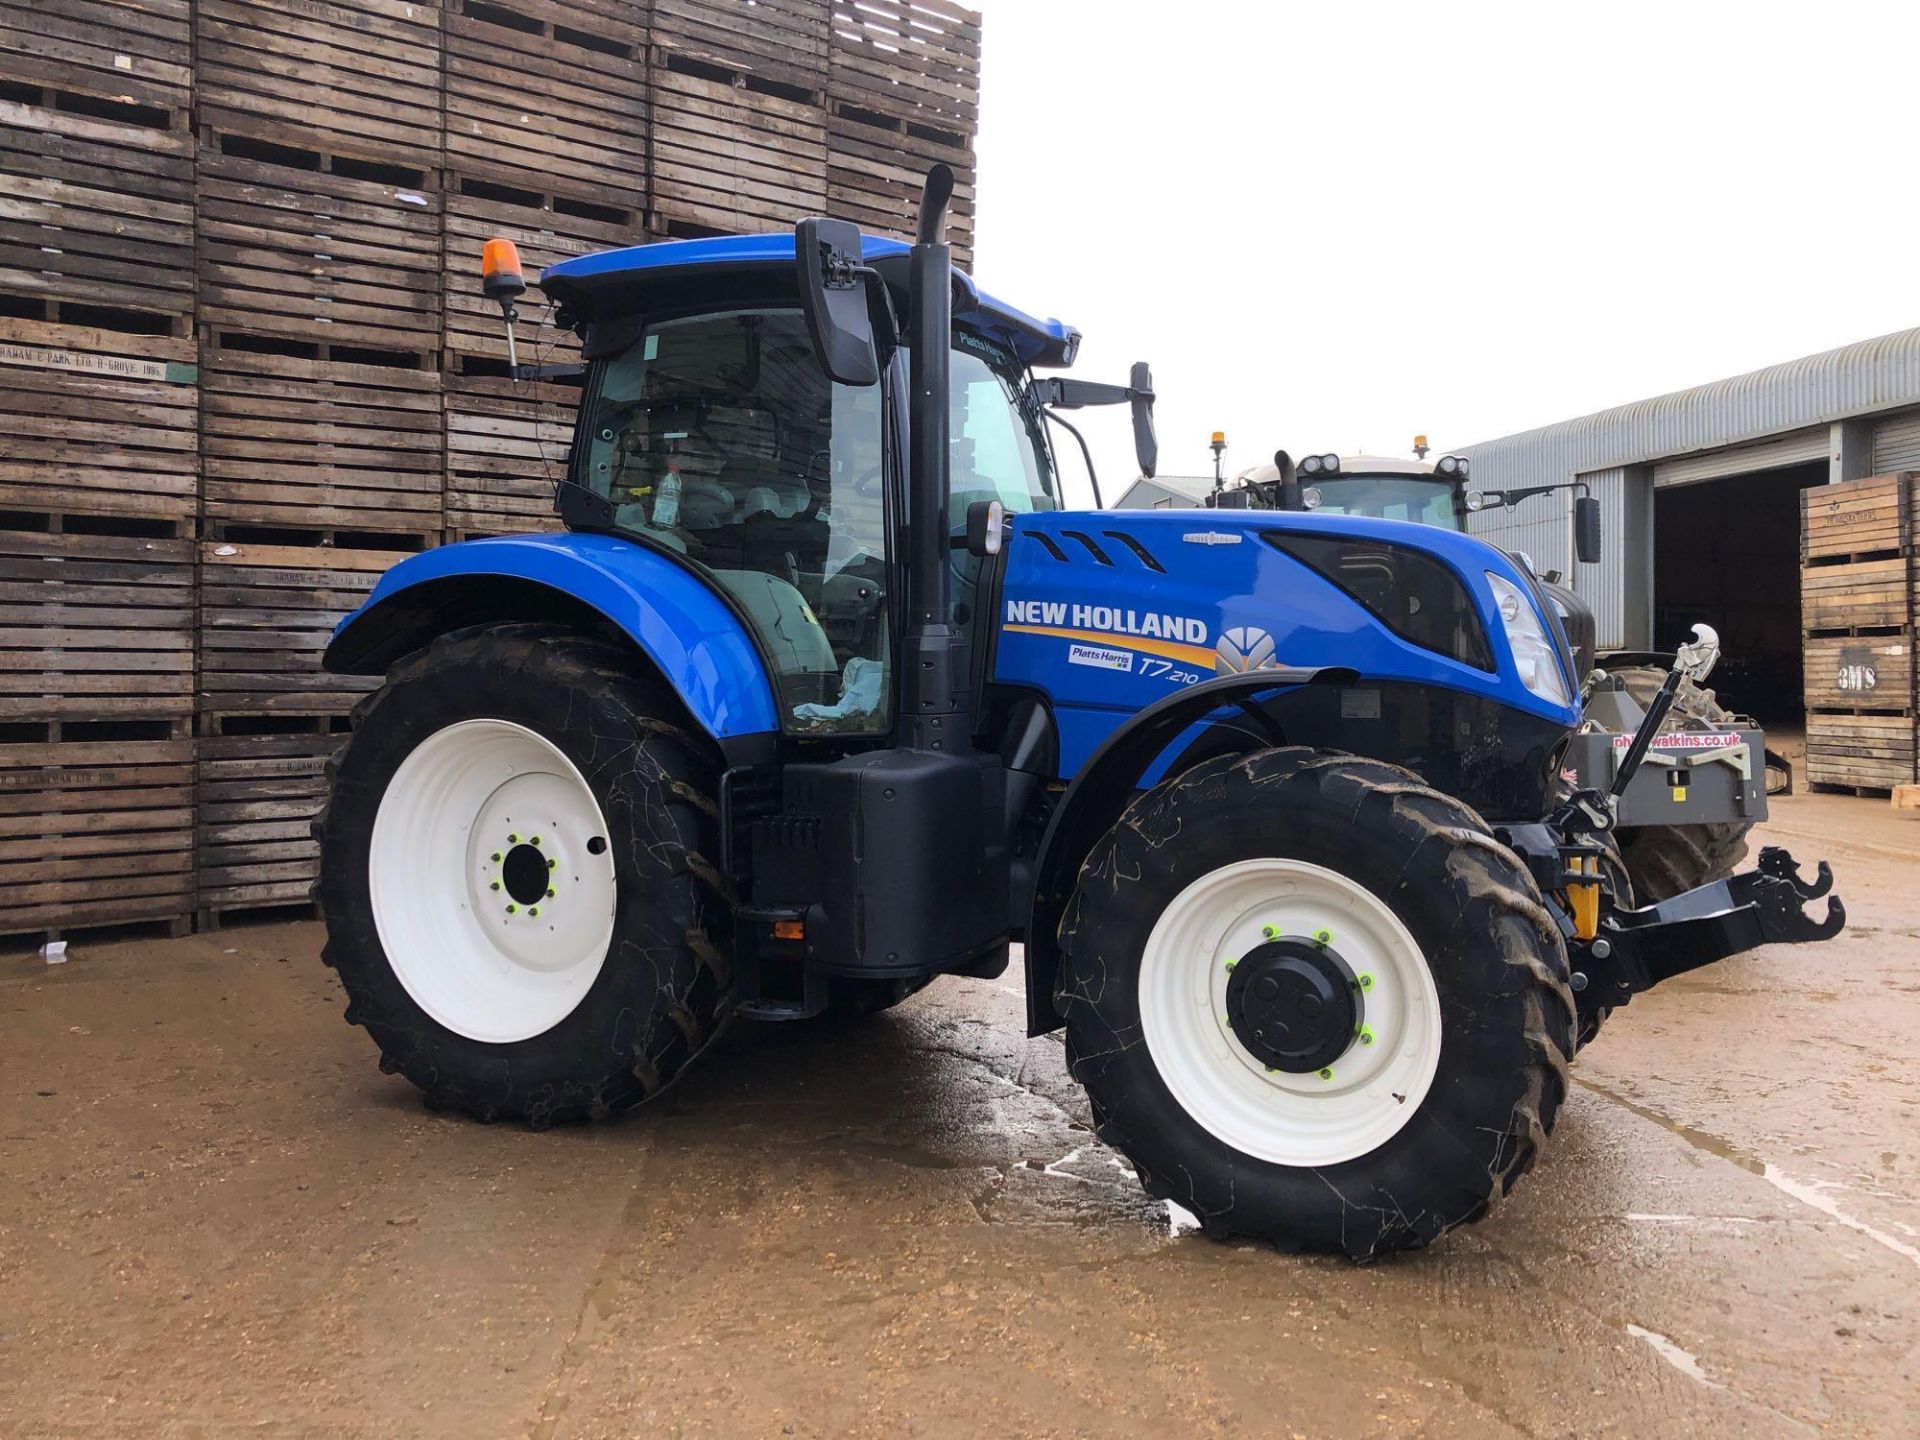 2019 New Holland T7.210 4wd Auto Command 50Kph tractor with front linkage and PTO, 4 electric spools - Image 9 of 18